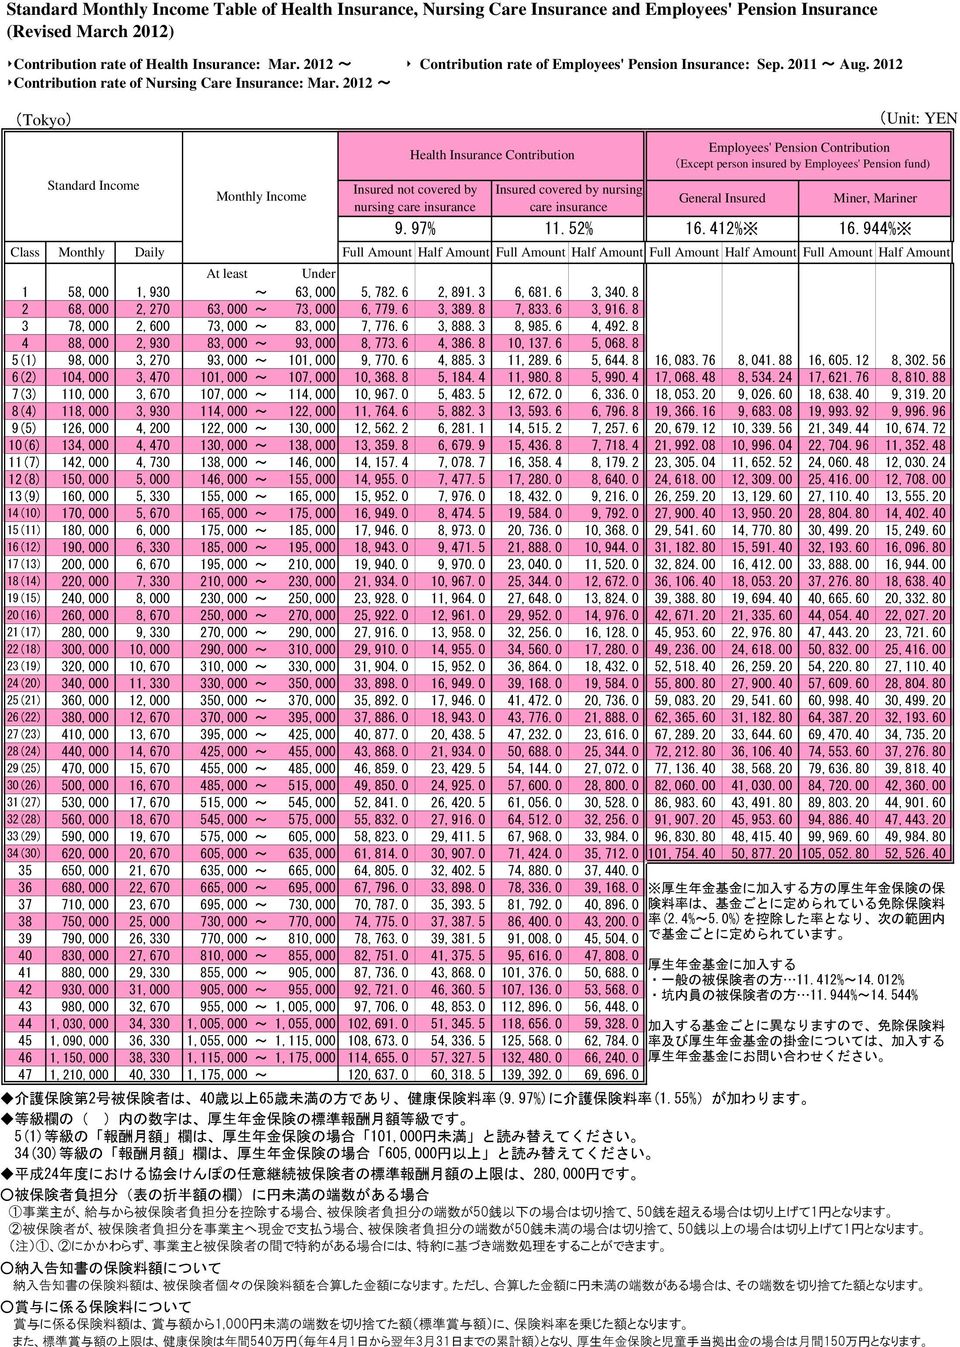 2012 ~ (Tokyo) (Unit: YEN Standard Income Monthly Income Health Contribution Insured not covered by nursing care insurance Insured covered by nursing care insurance Employees' Pension Contribution